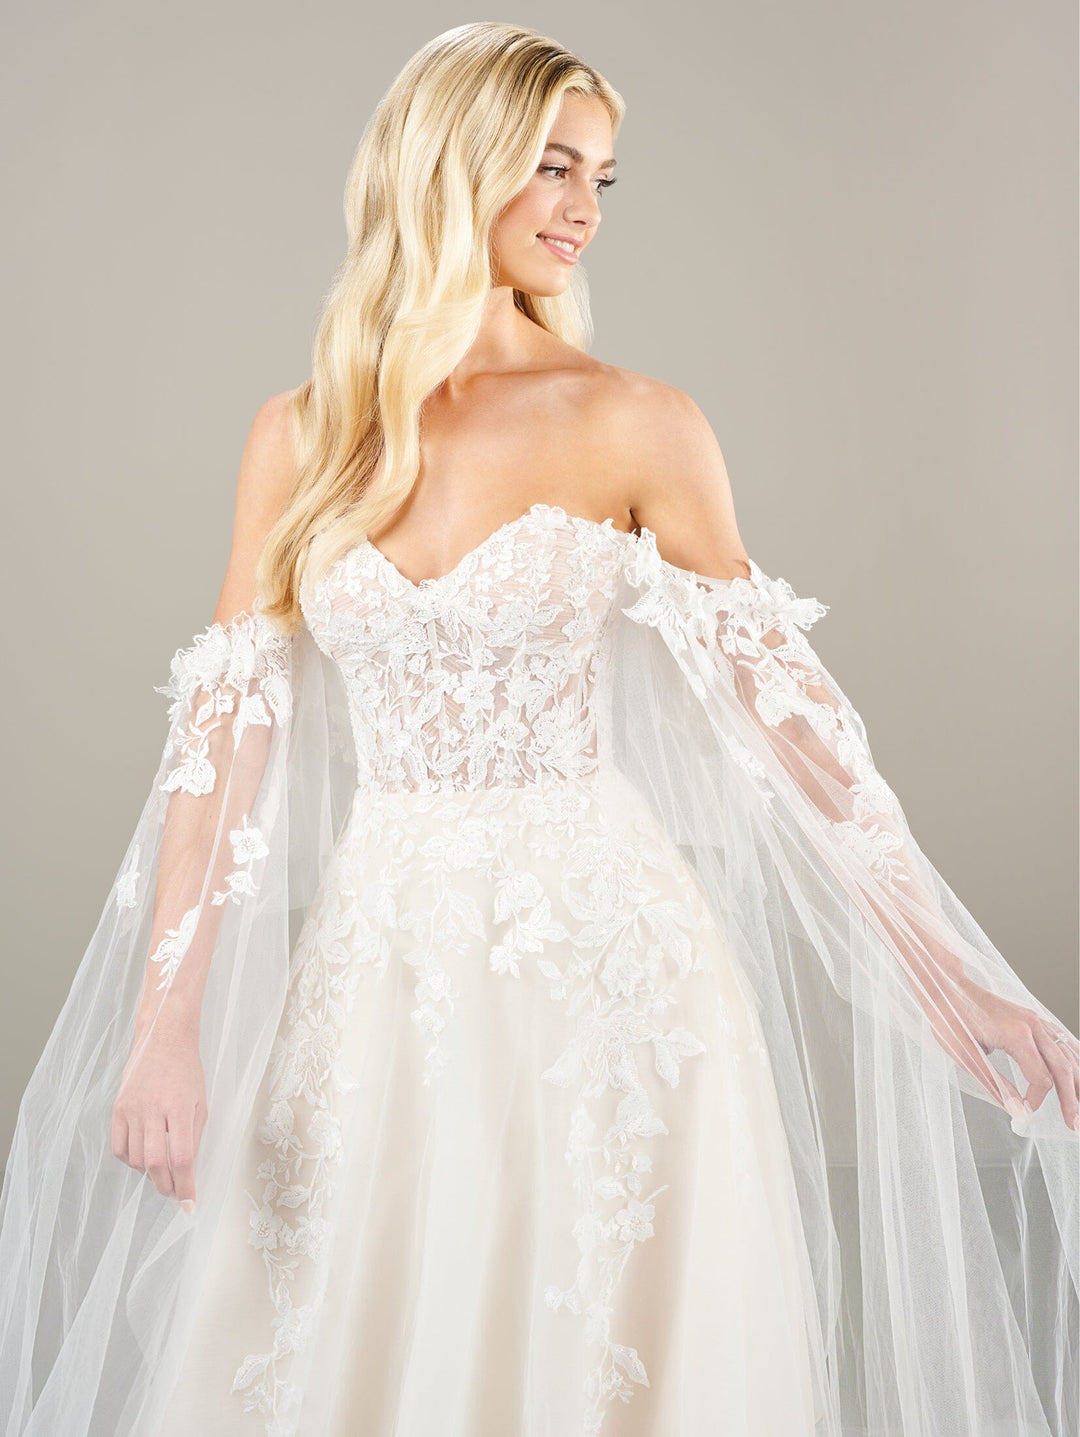 Applique Cape Sleeve Bridal Gown by Adrianna Papell 31277